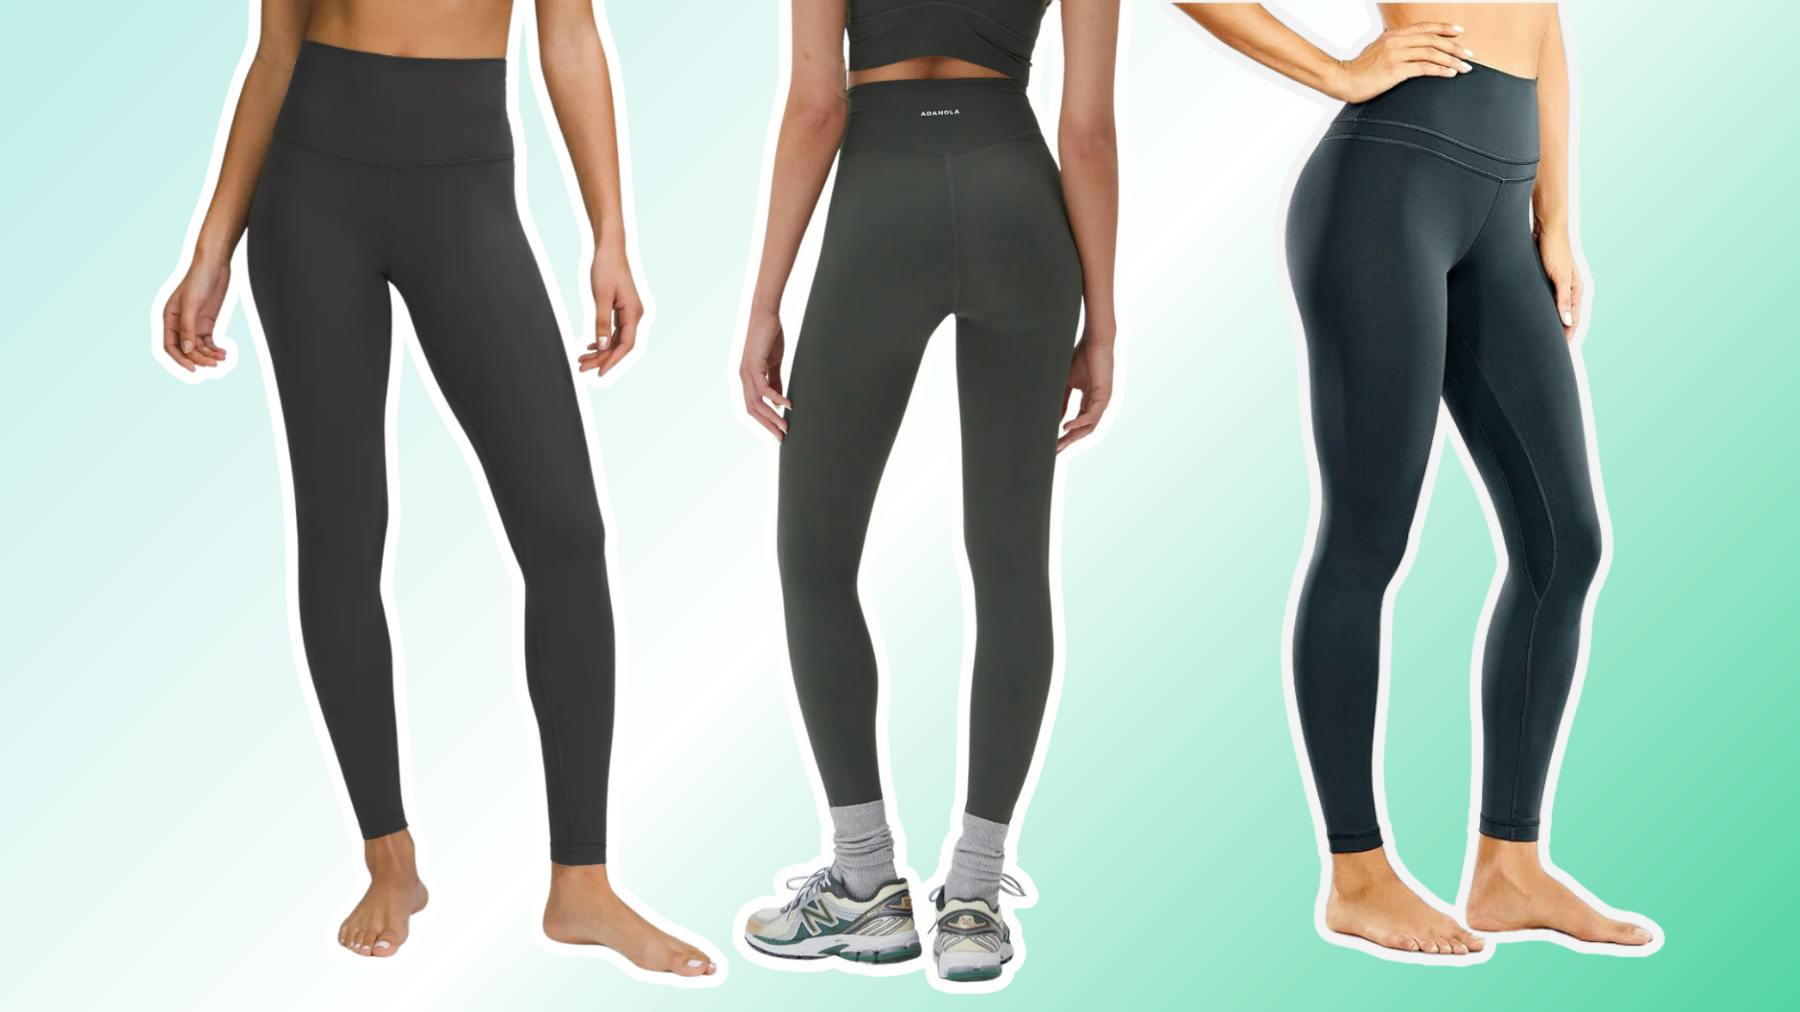 9 pairs of high waisted leggings that don't fall down | Express.co.uk